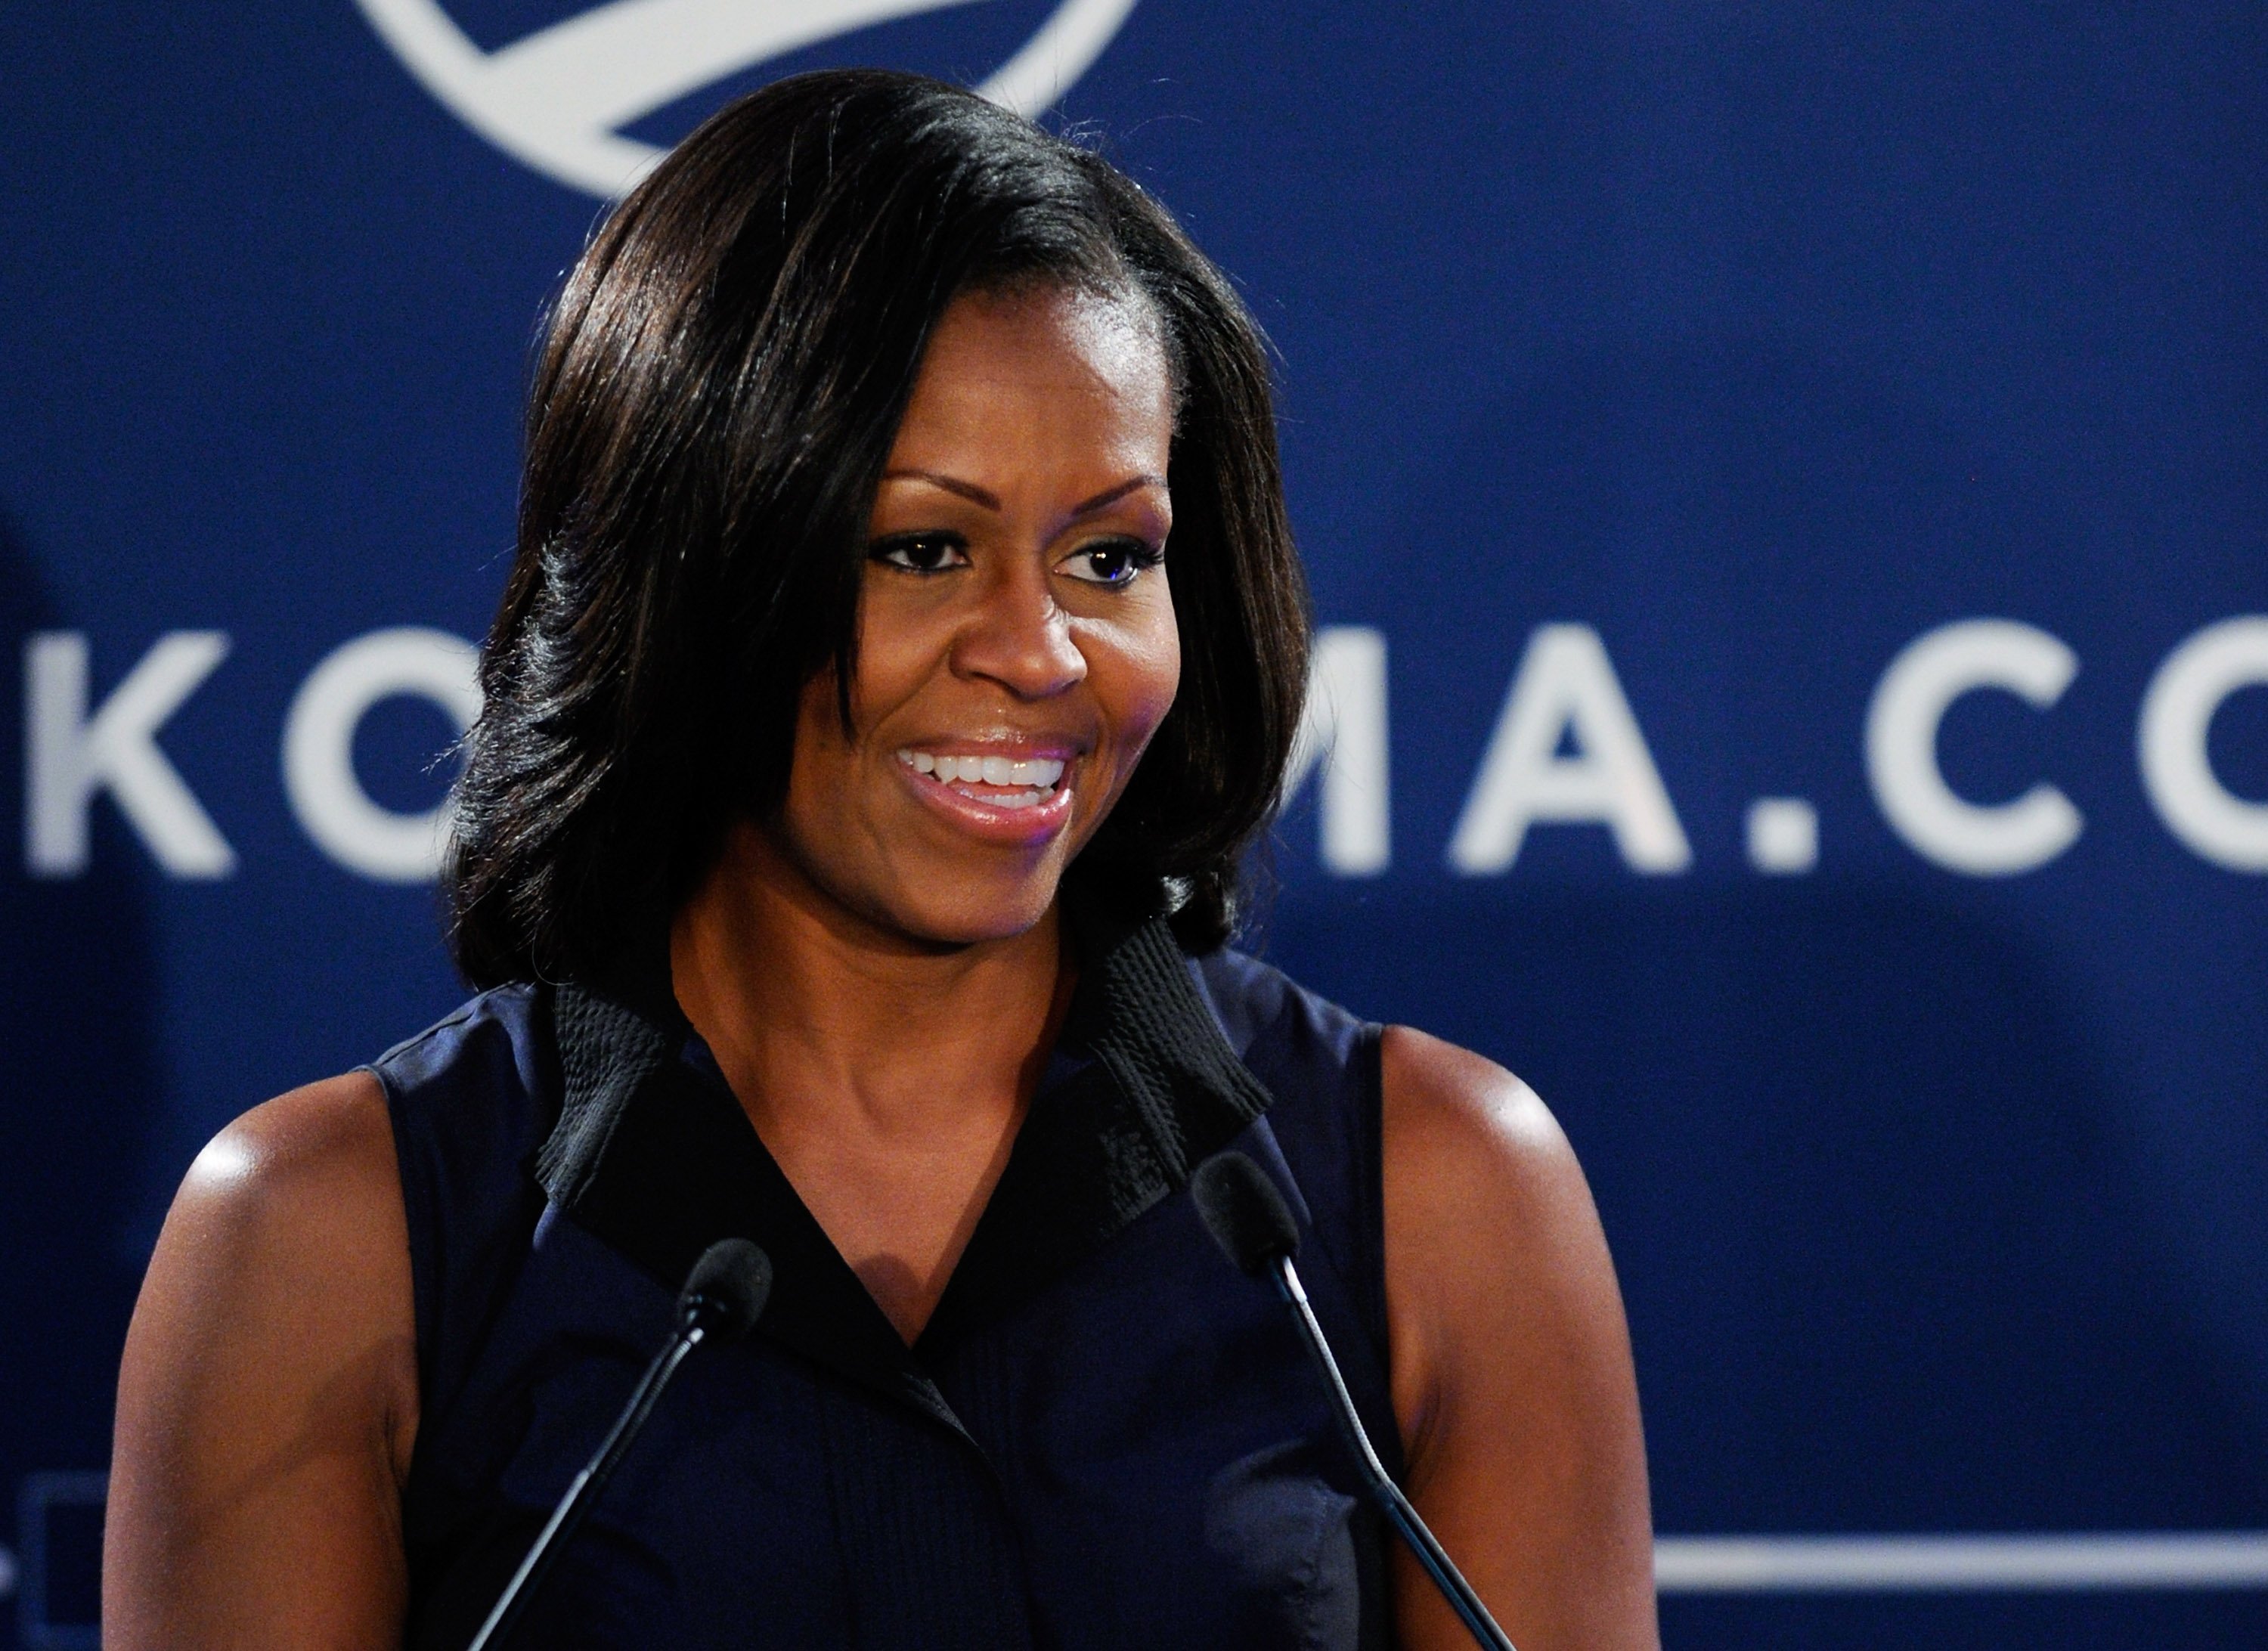 Michelle Obama at a speaking engagement as First Lady in 2012. | Photo: Getty Images